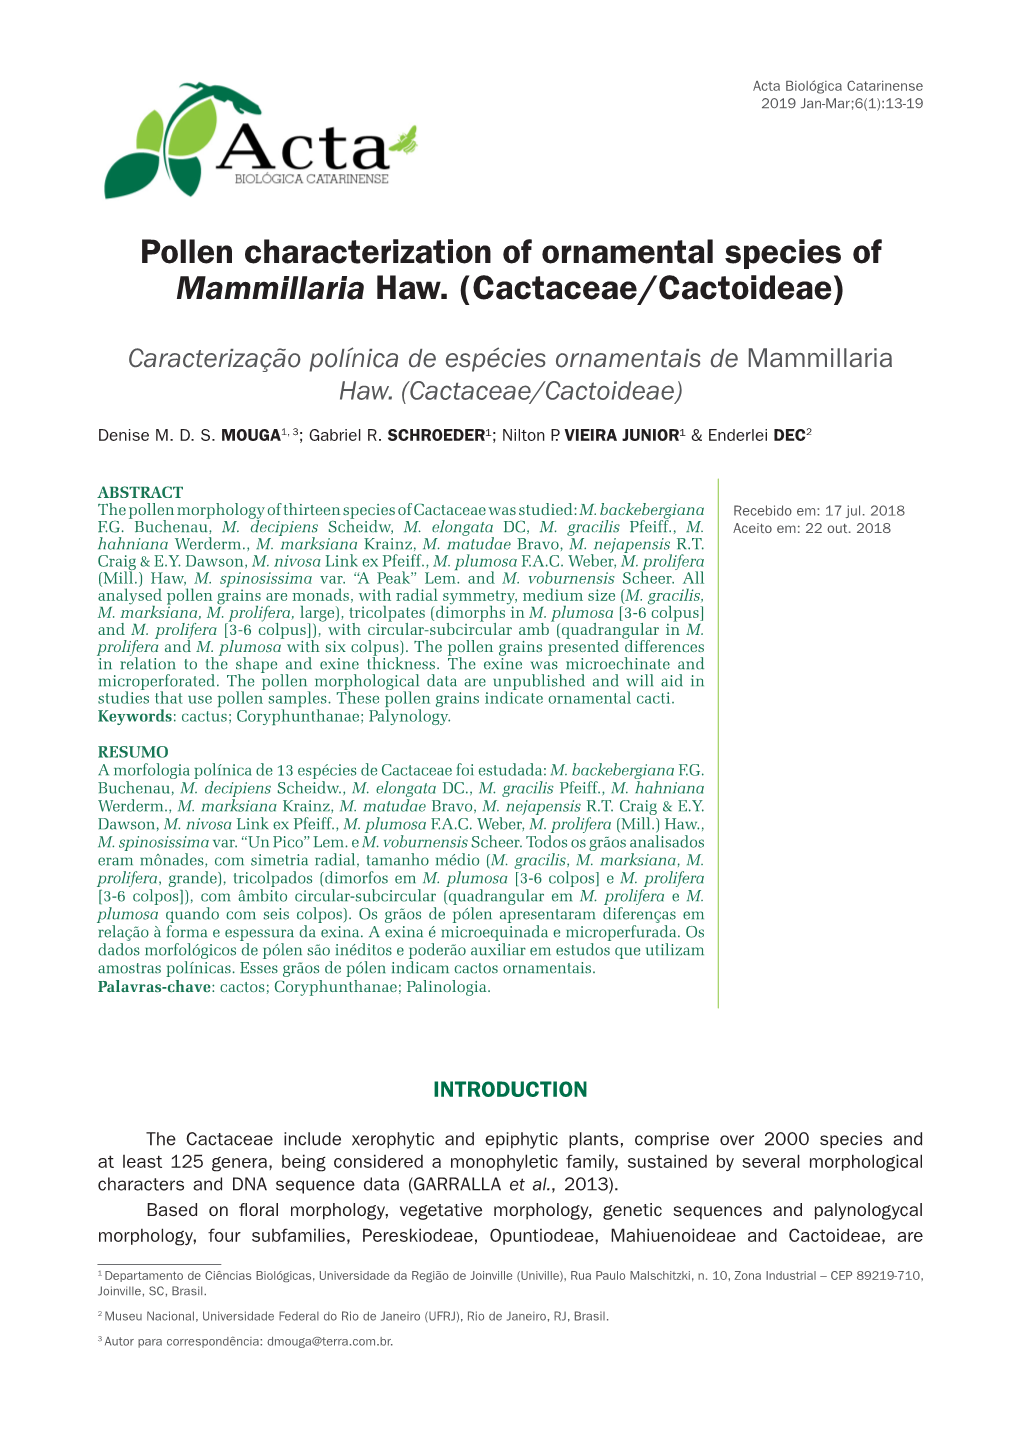 Pollen Characterization of Ornamental Species of Mammillaria Haw. (Cactaceae/Cactoideae)